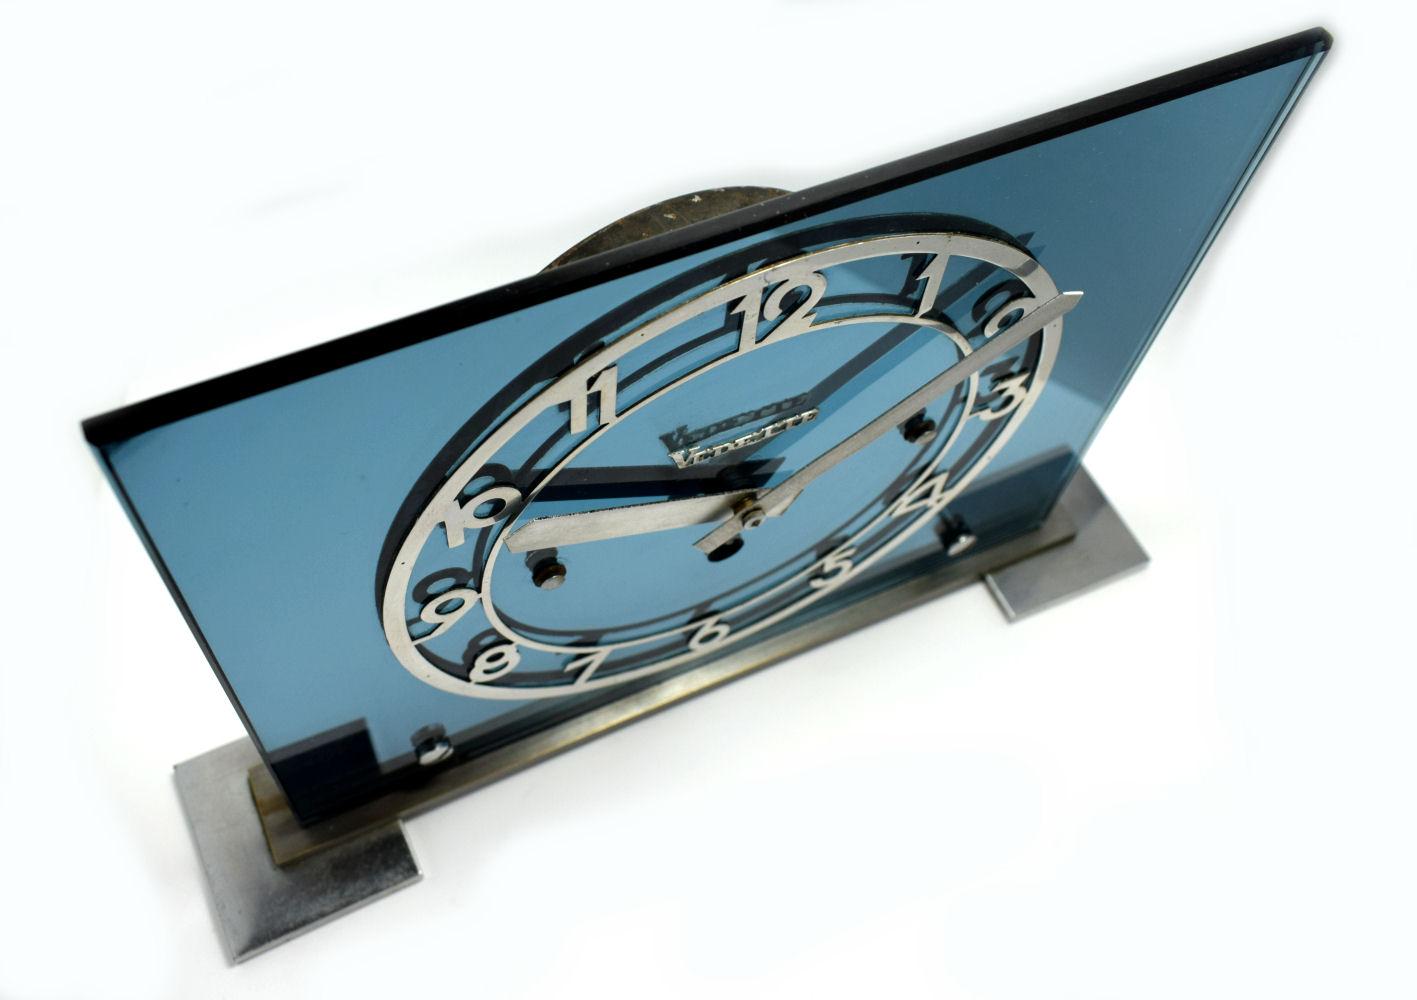 vedette wall clock value